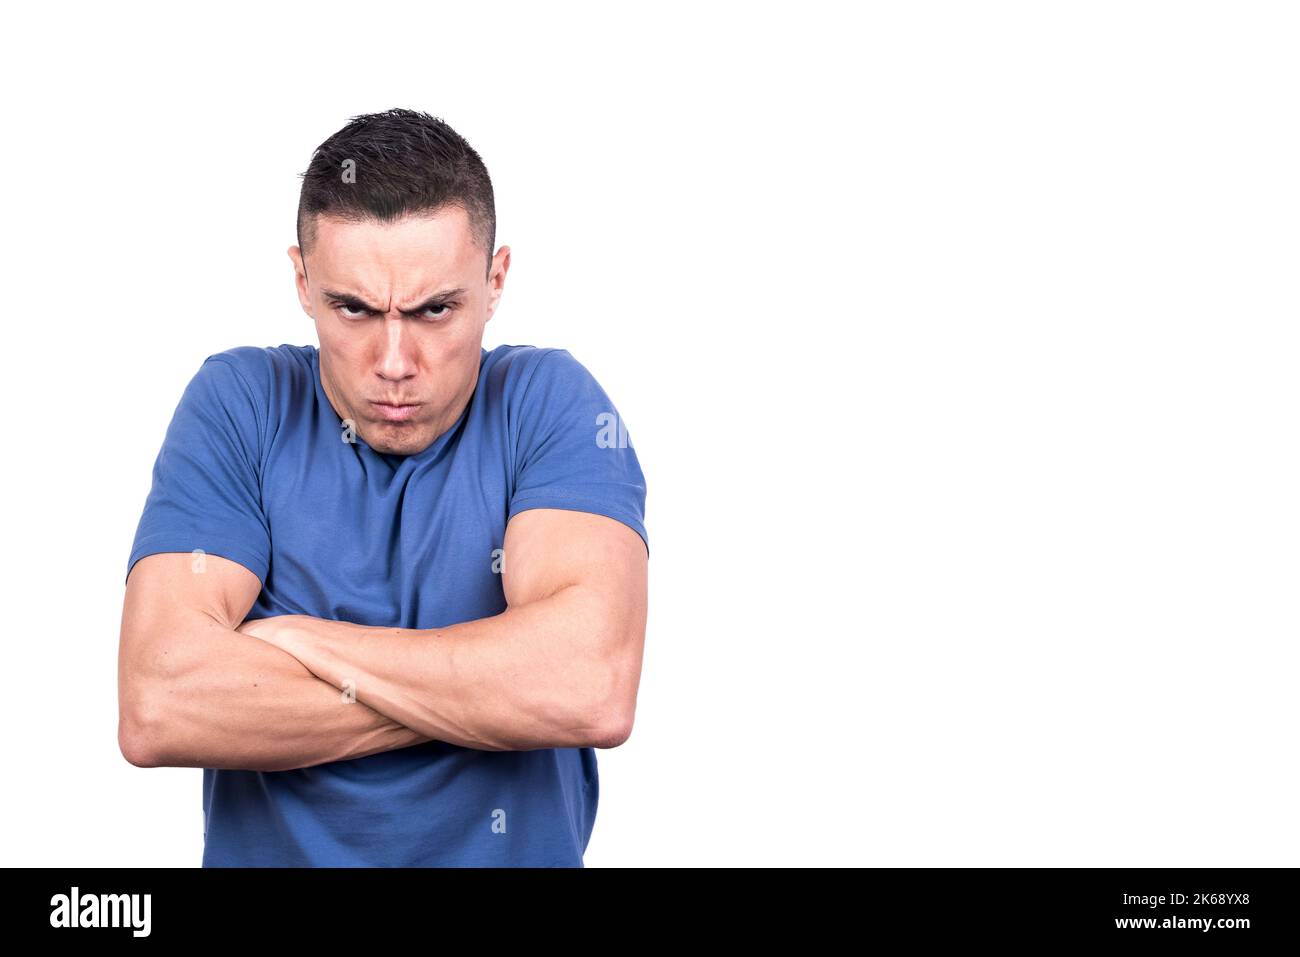 Man with crossed arms and angry scowl Stock Photo